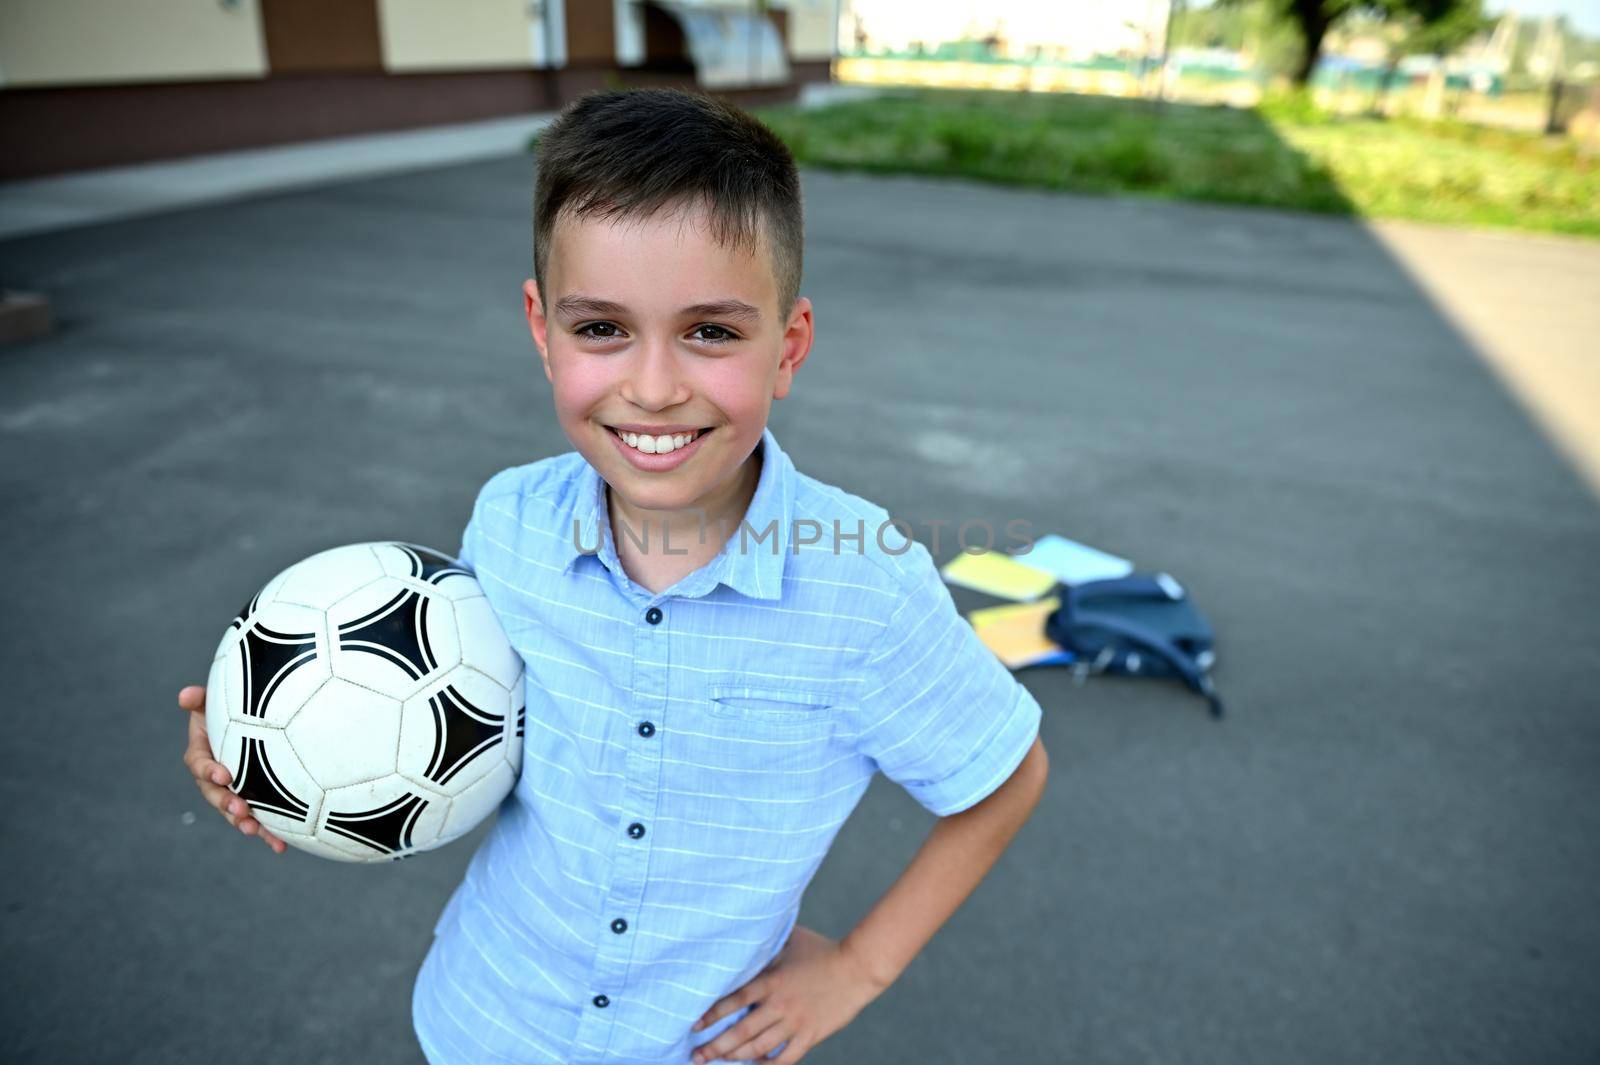 Handsome cheerful schoolboy with soccer ball in hands smiling with toothy smile on the background of scattered backpack with school supplies on the schoolyard. Recreation. Rest between lessons